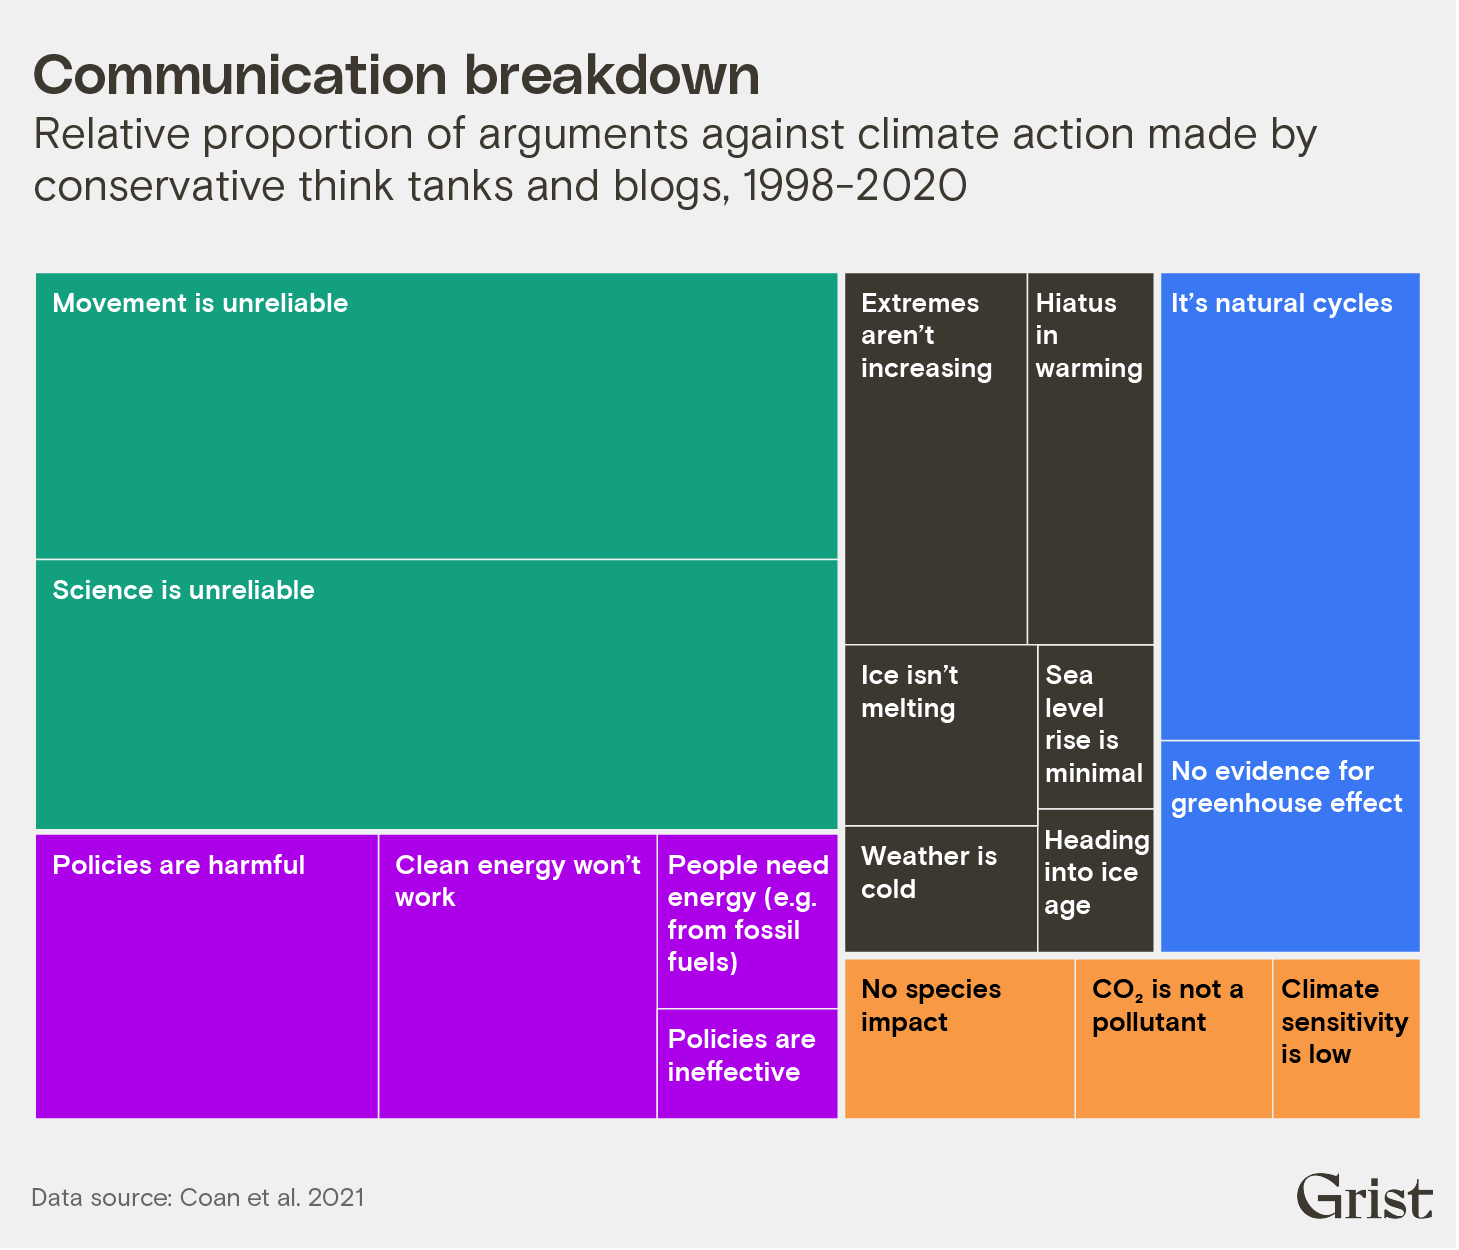 A tree map showing the relative proportion of arguments against climate action made by conservative think tanks and blogs between 1998 and 2020. A majority of claims consisted of attacks on climate science and the climate movement.